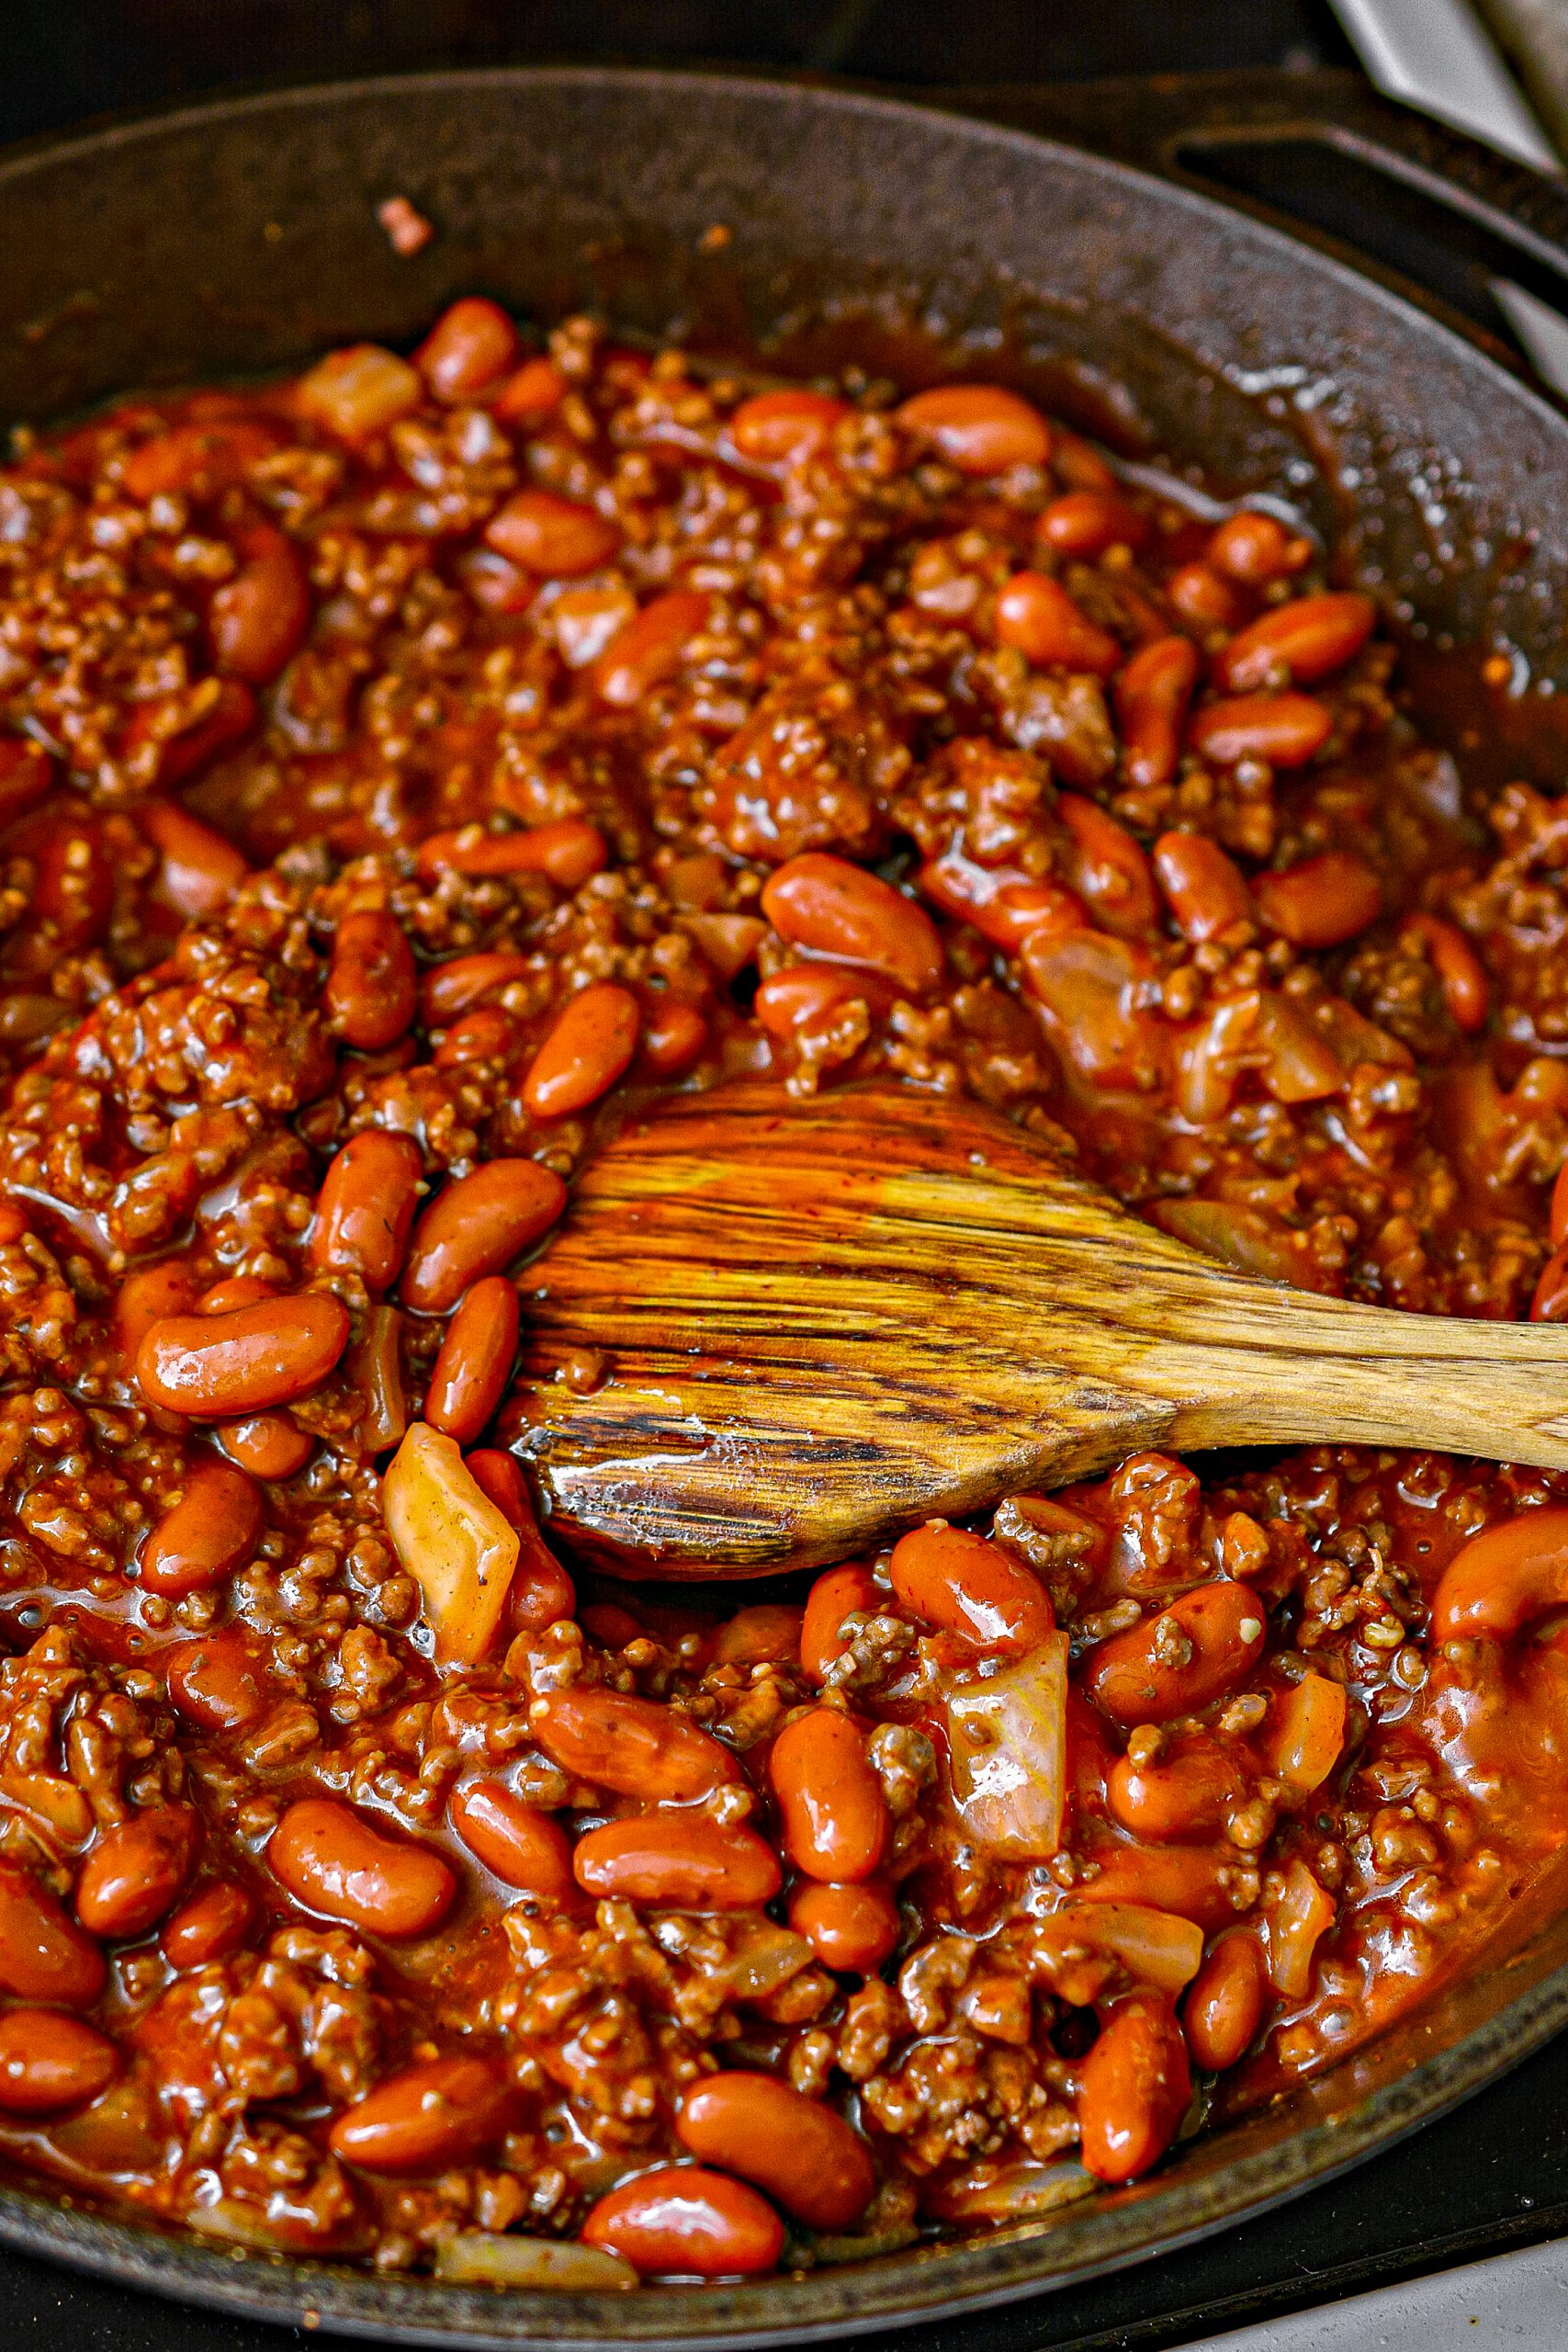 our the kidney beans and French dressing into the skillet, stir to combine, and lower the heat to low. Simmer for 5-10 minutes, and then remove from the heat to cool slightly.